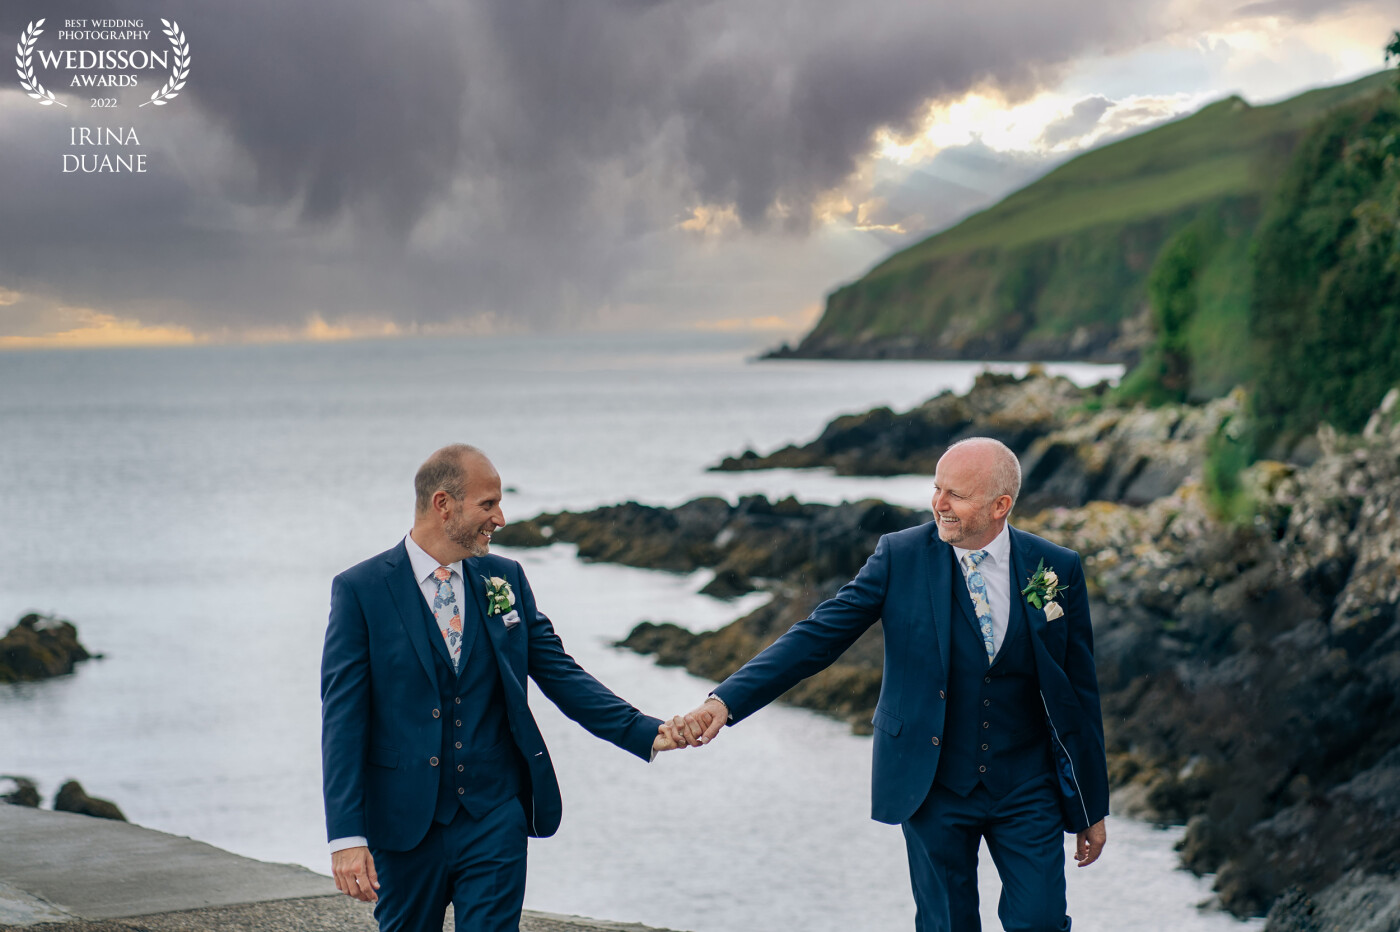 Taken at the beautiful Cliff House Hotel Ardmore, Ireland just before it started to rain. Der and John were just a photographer's dream to work with it. Such a stunning location and amazing day from start to finish.